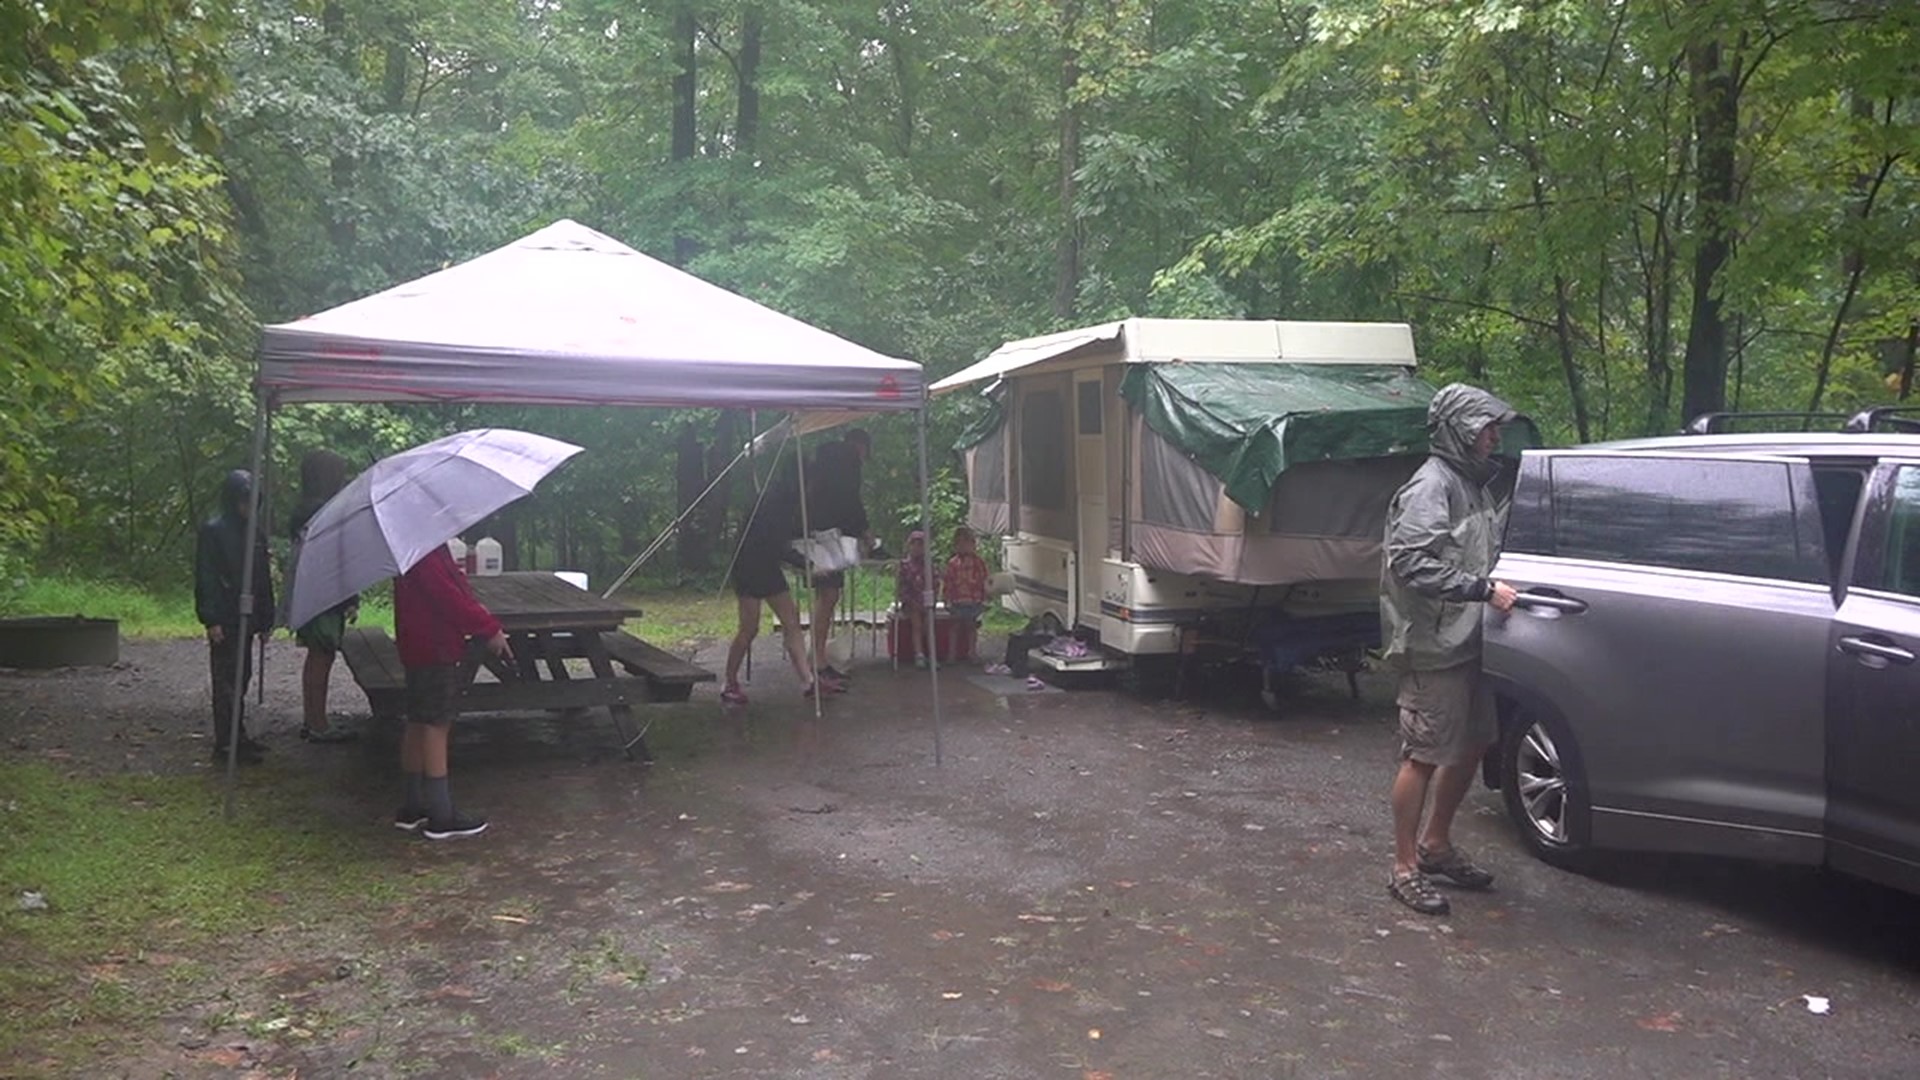 For some campers, spending their rainy Labor Day in the great outdoors meant more work than usual. Newswatch 16's Chelsea Strub explains.